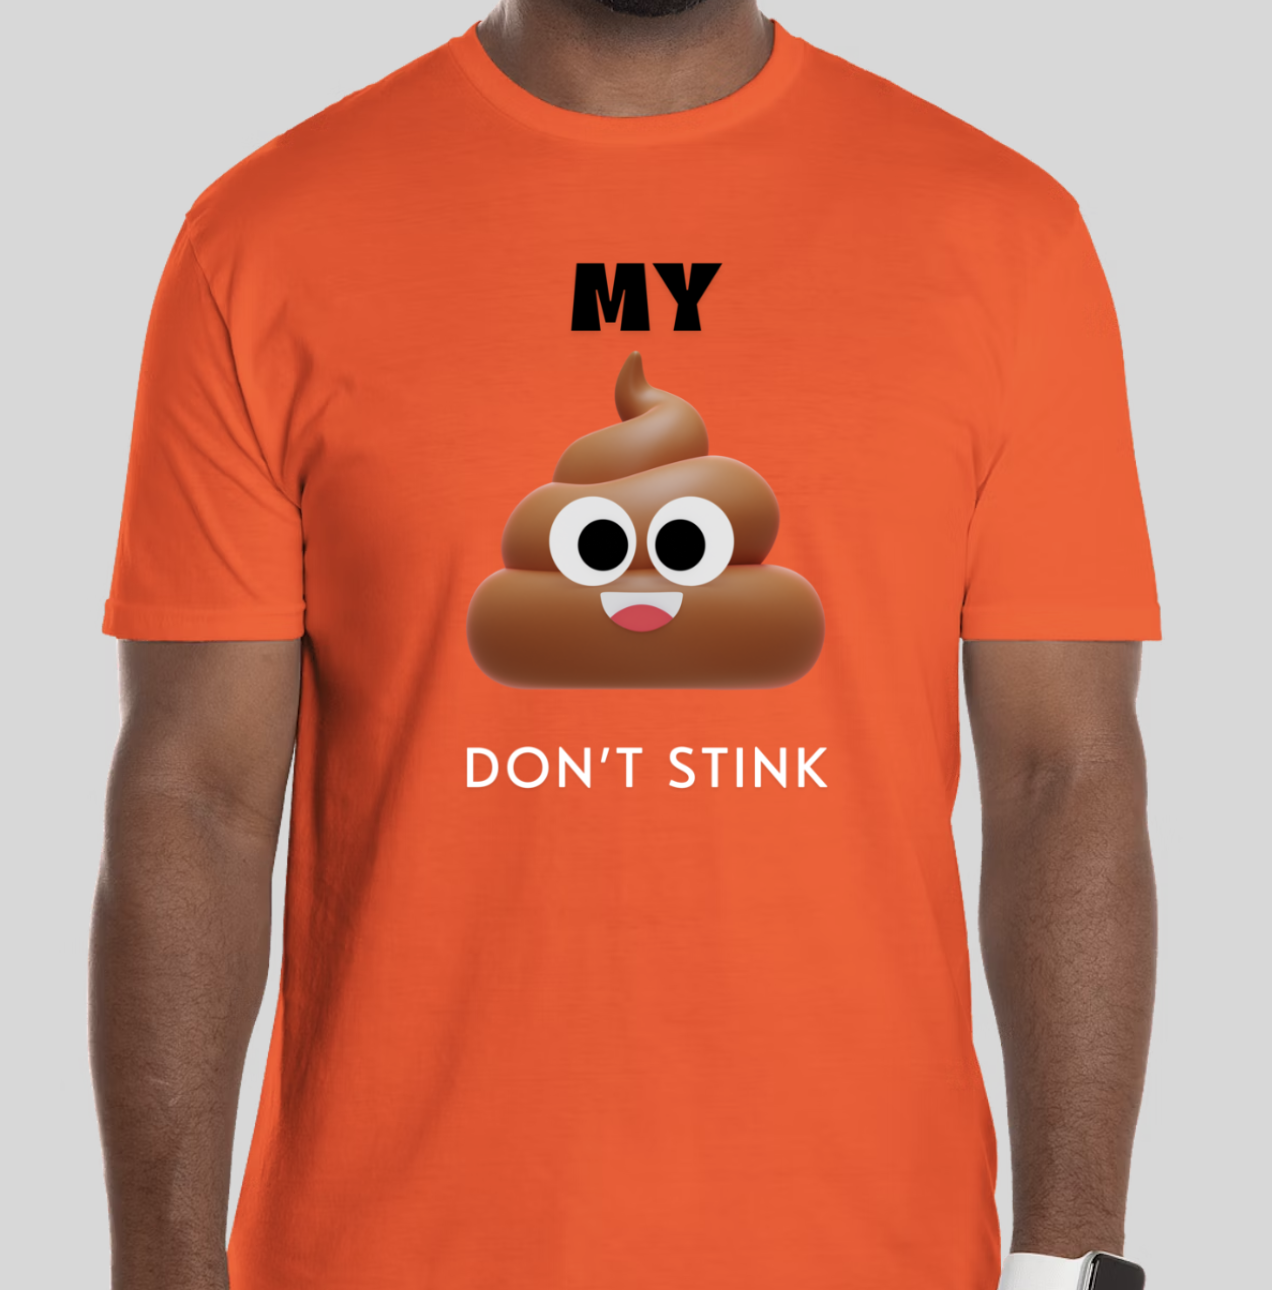 The Don't Stink t-shirt features the poop emoji alongside a popular phrase. The classic BHS logo is applied to the back of the t-shirt.